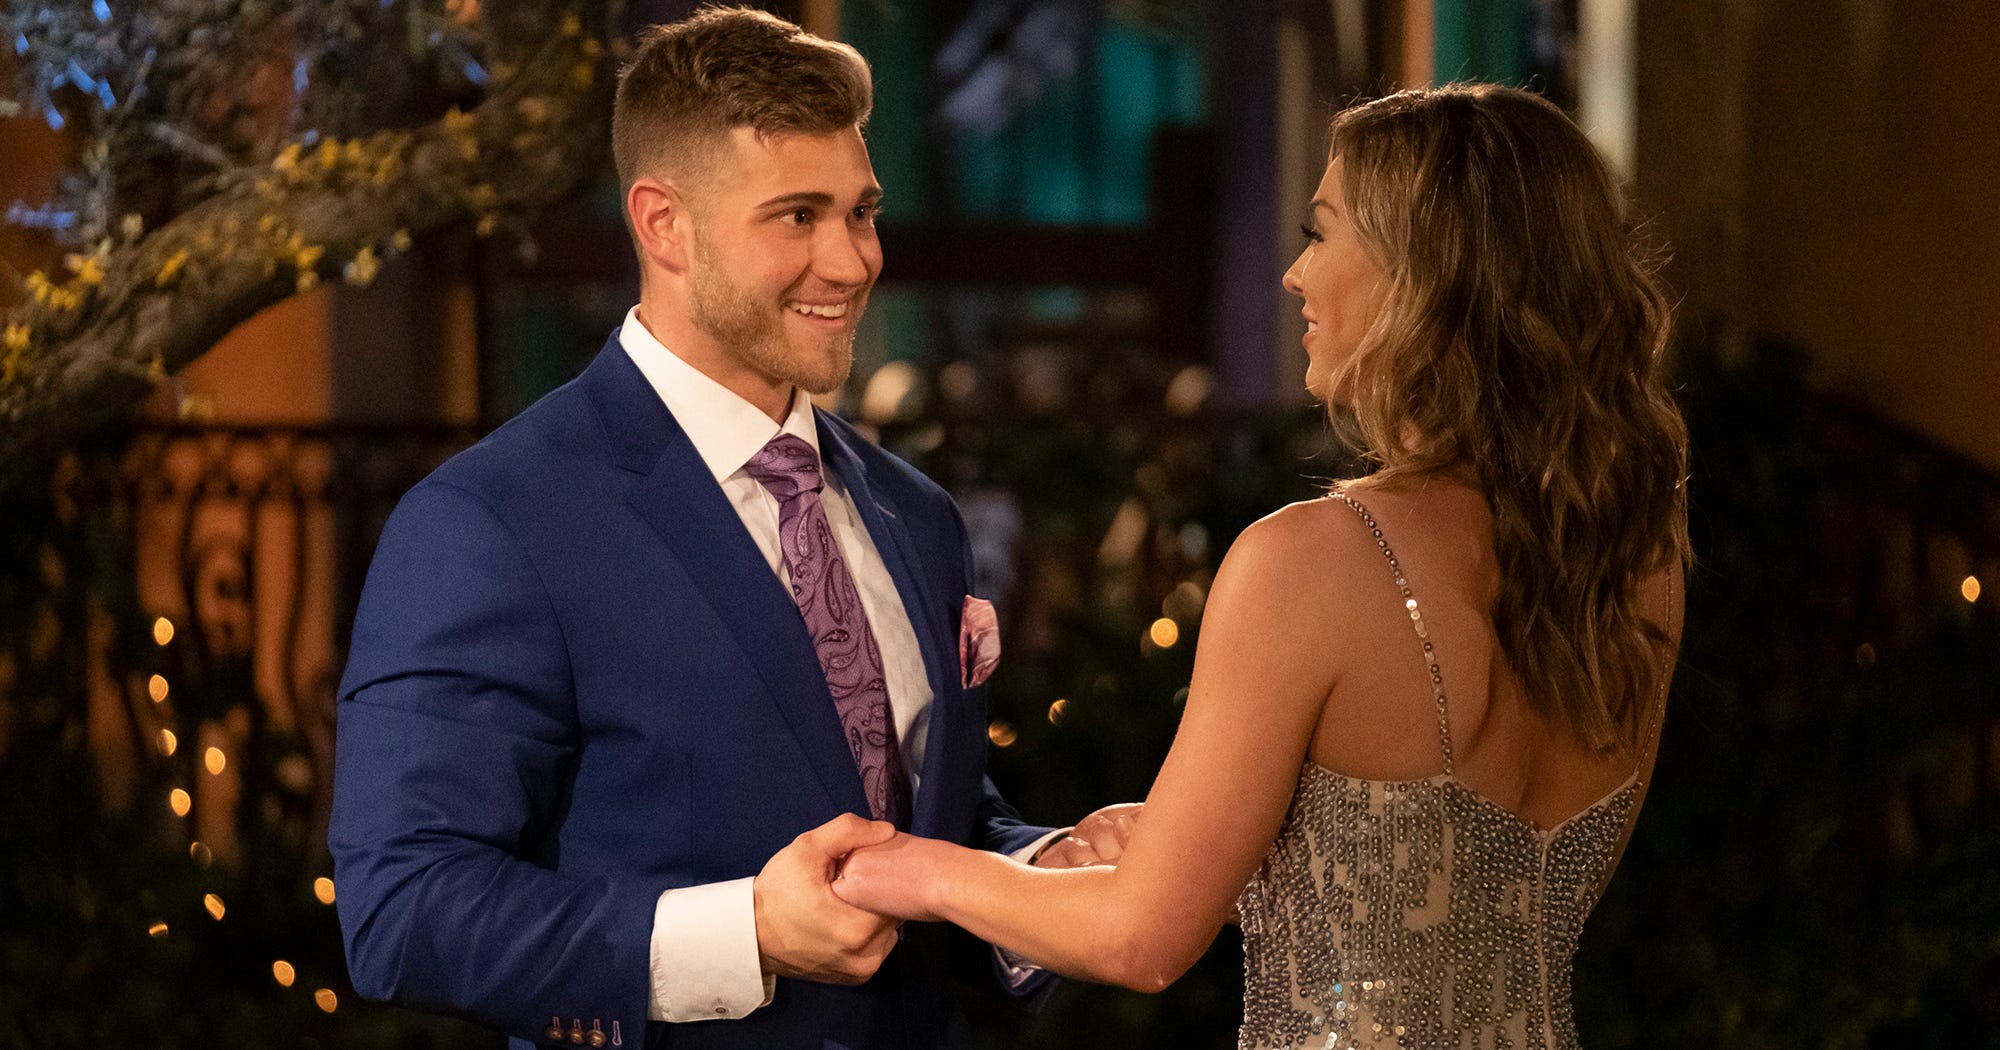 The Bachelorette Season 21 Release Date Has The Production For The